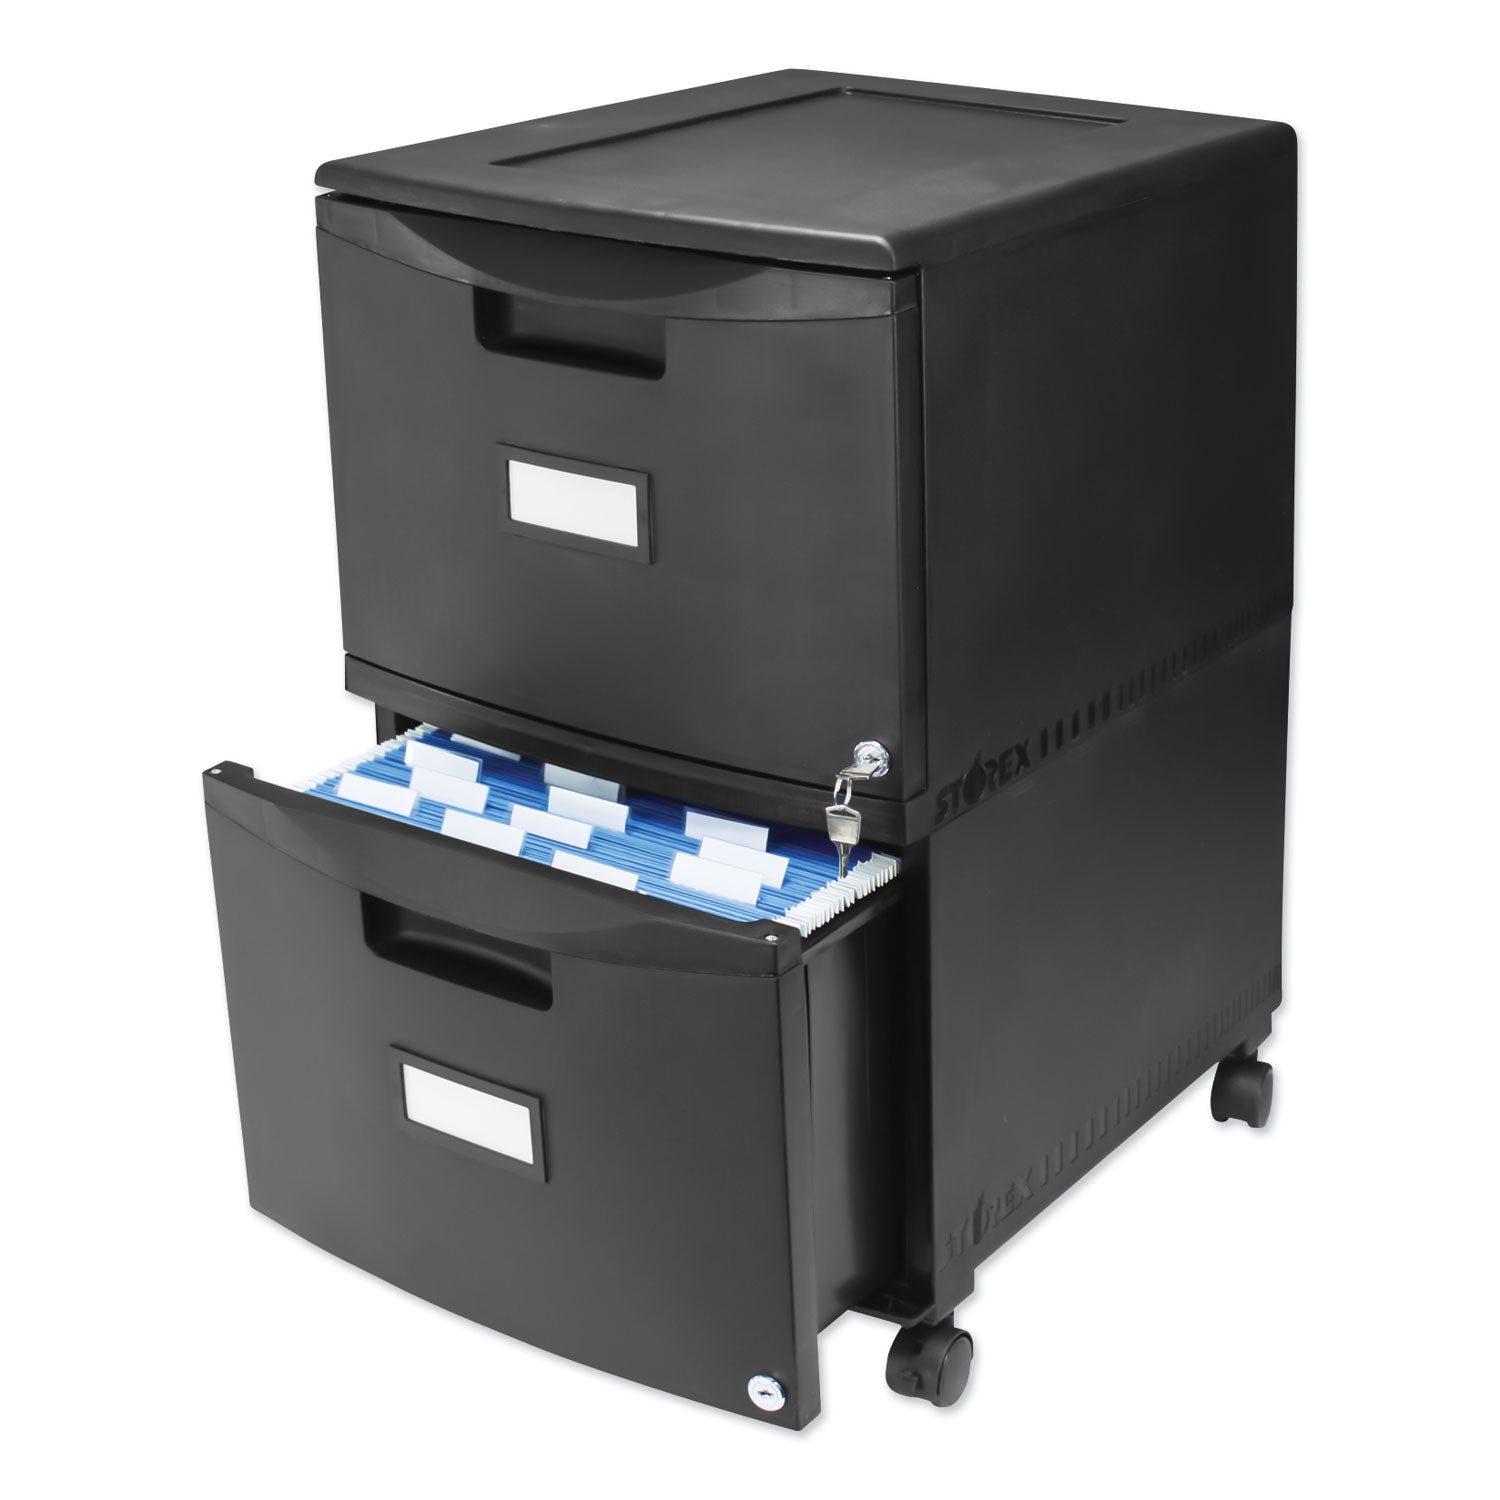 two-drawer-mobile-filing-cabinet-2-legal-letter-size-file-drawers-black-1475-x-1825-x-26_stx61312b01c - 5